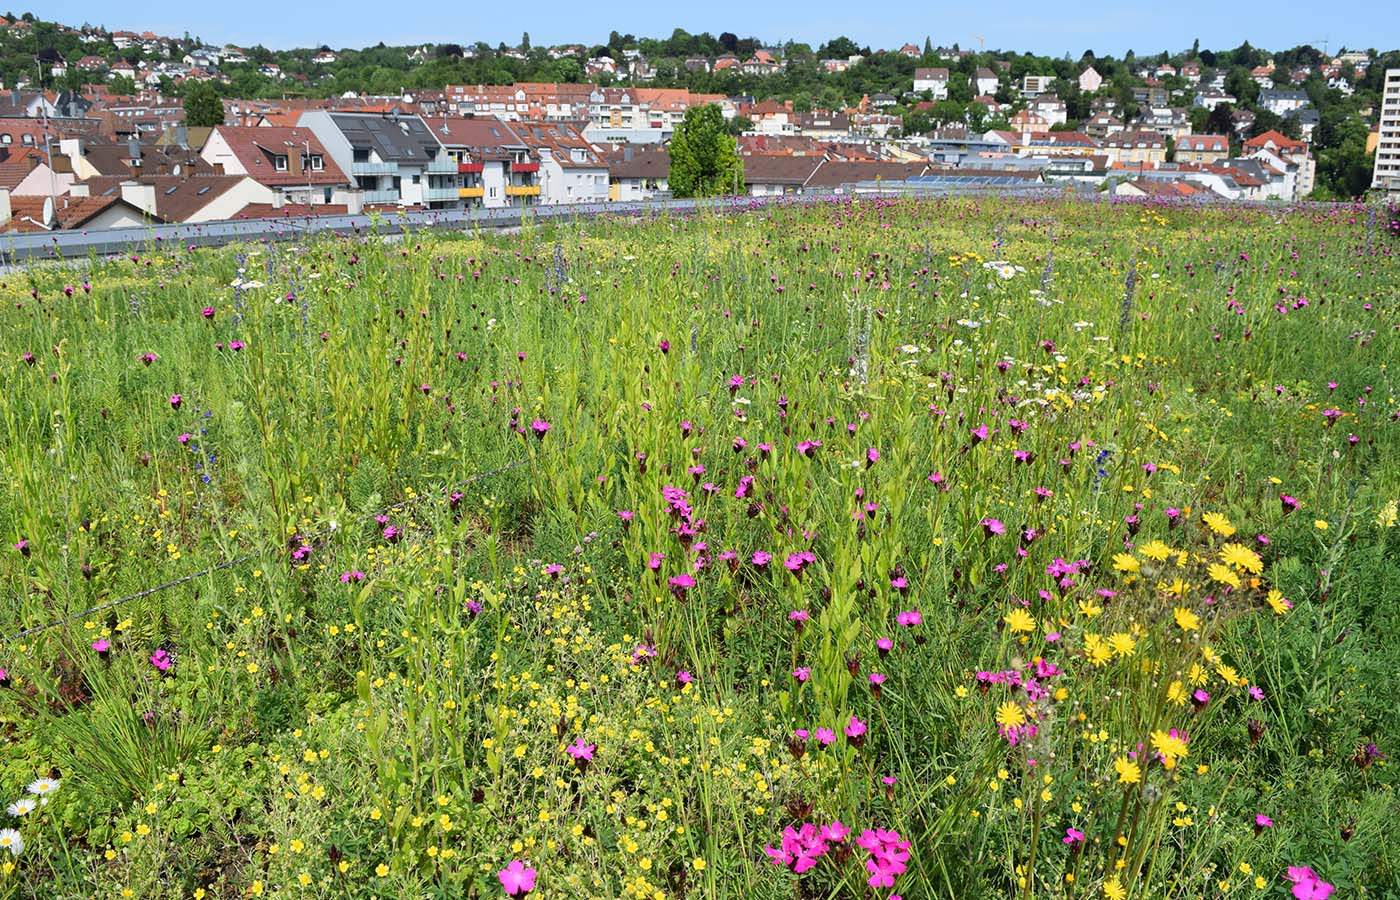 Stuttgart Green Program - Designing a Green Oasis in the Middle of the City